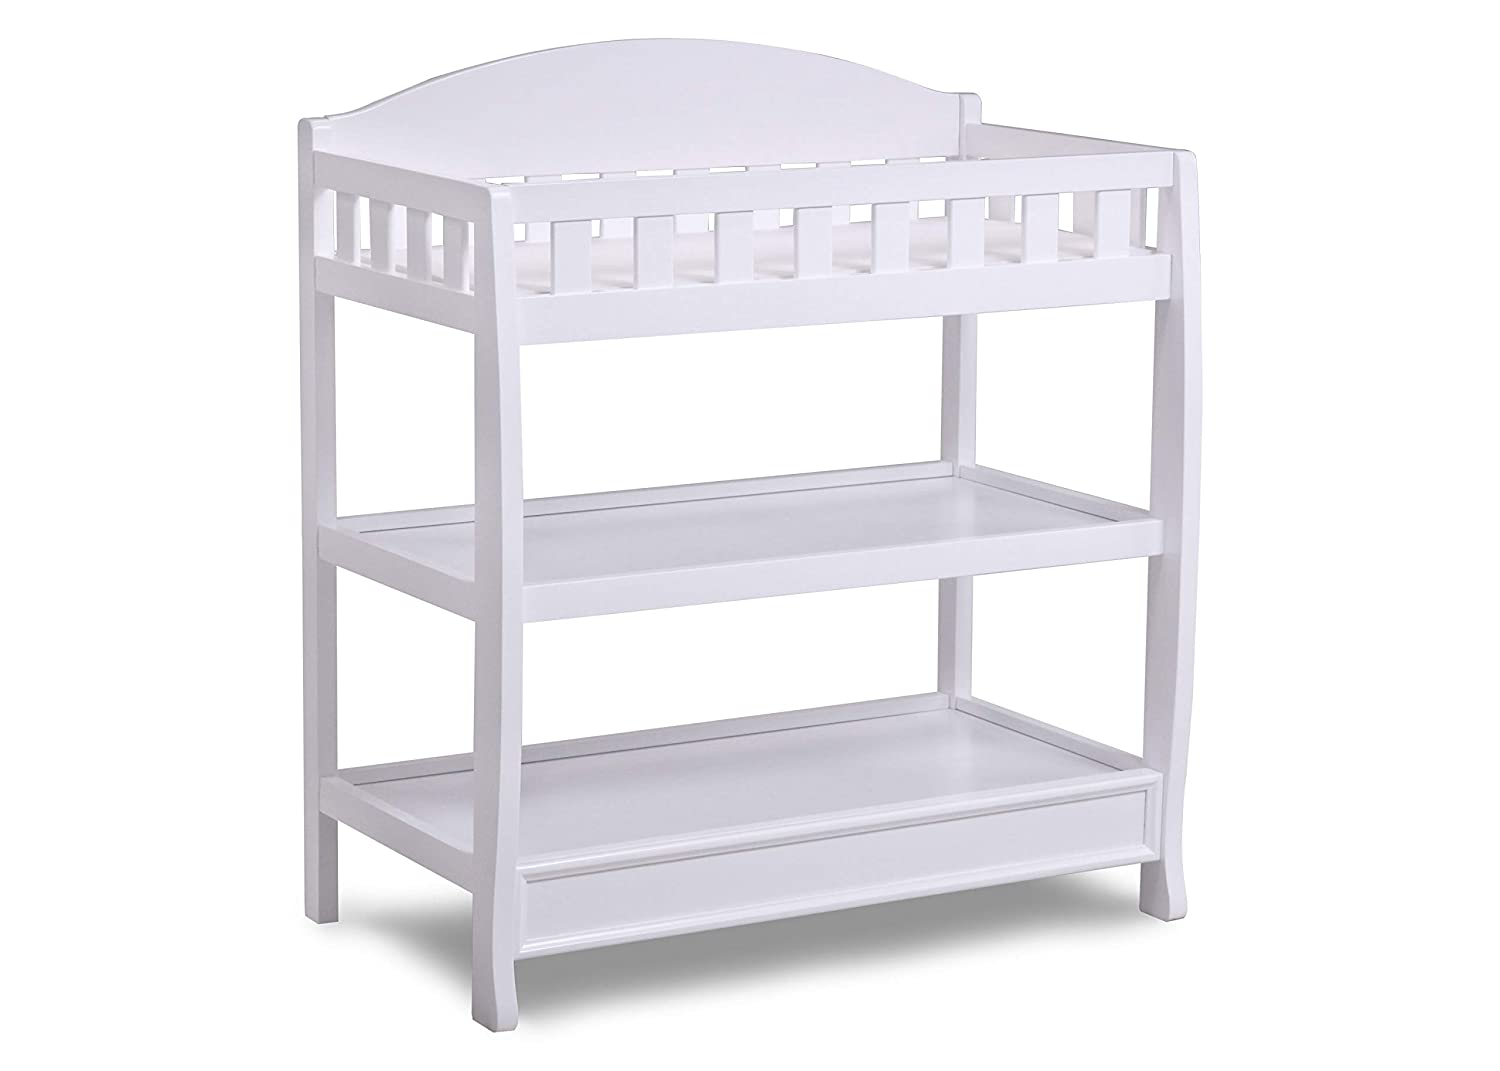 Delta Children Infant Changing Table with Pad